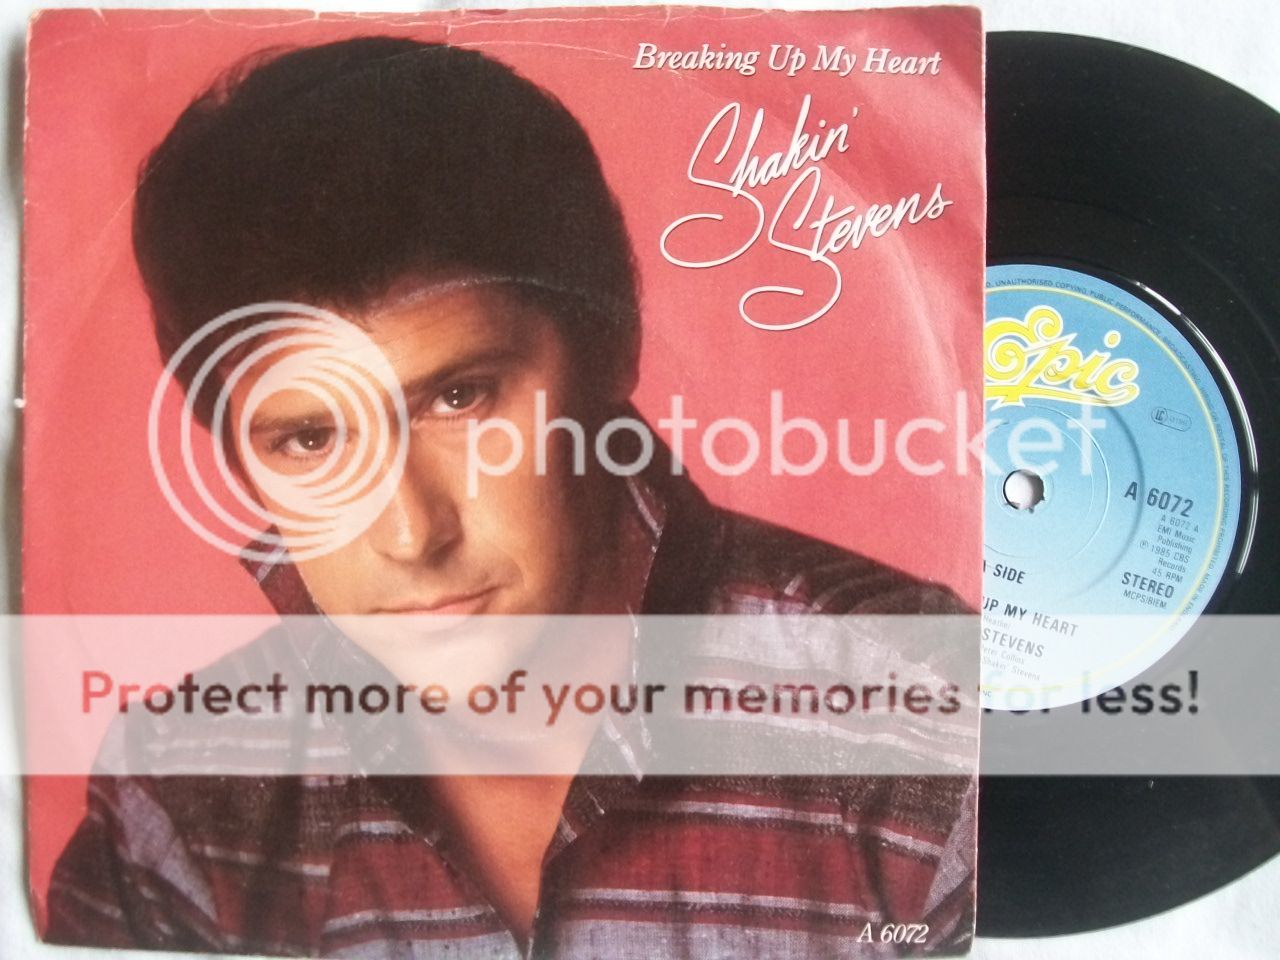 Shakin' Stevens Breaking Up My Heart Records, LPs, Vinyl and CDs ...